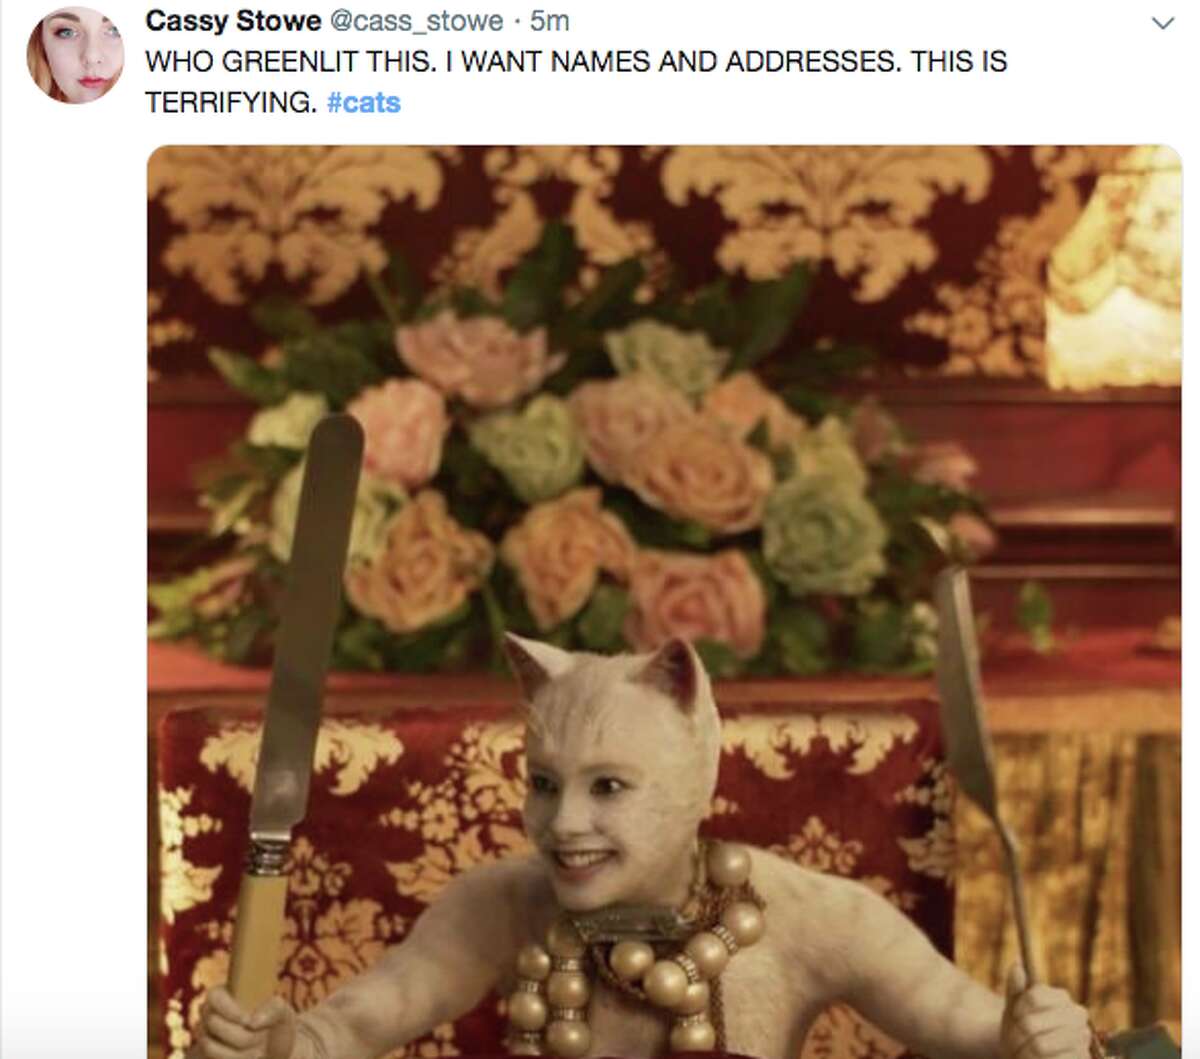 Twitter users react to the unsettling trailer for "Cats."